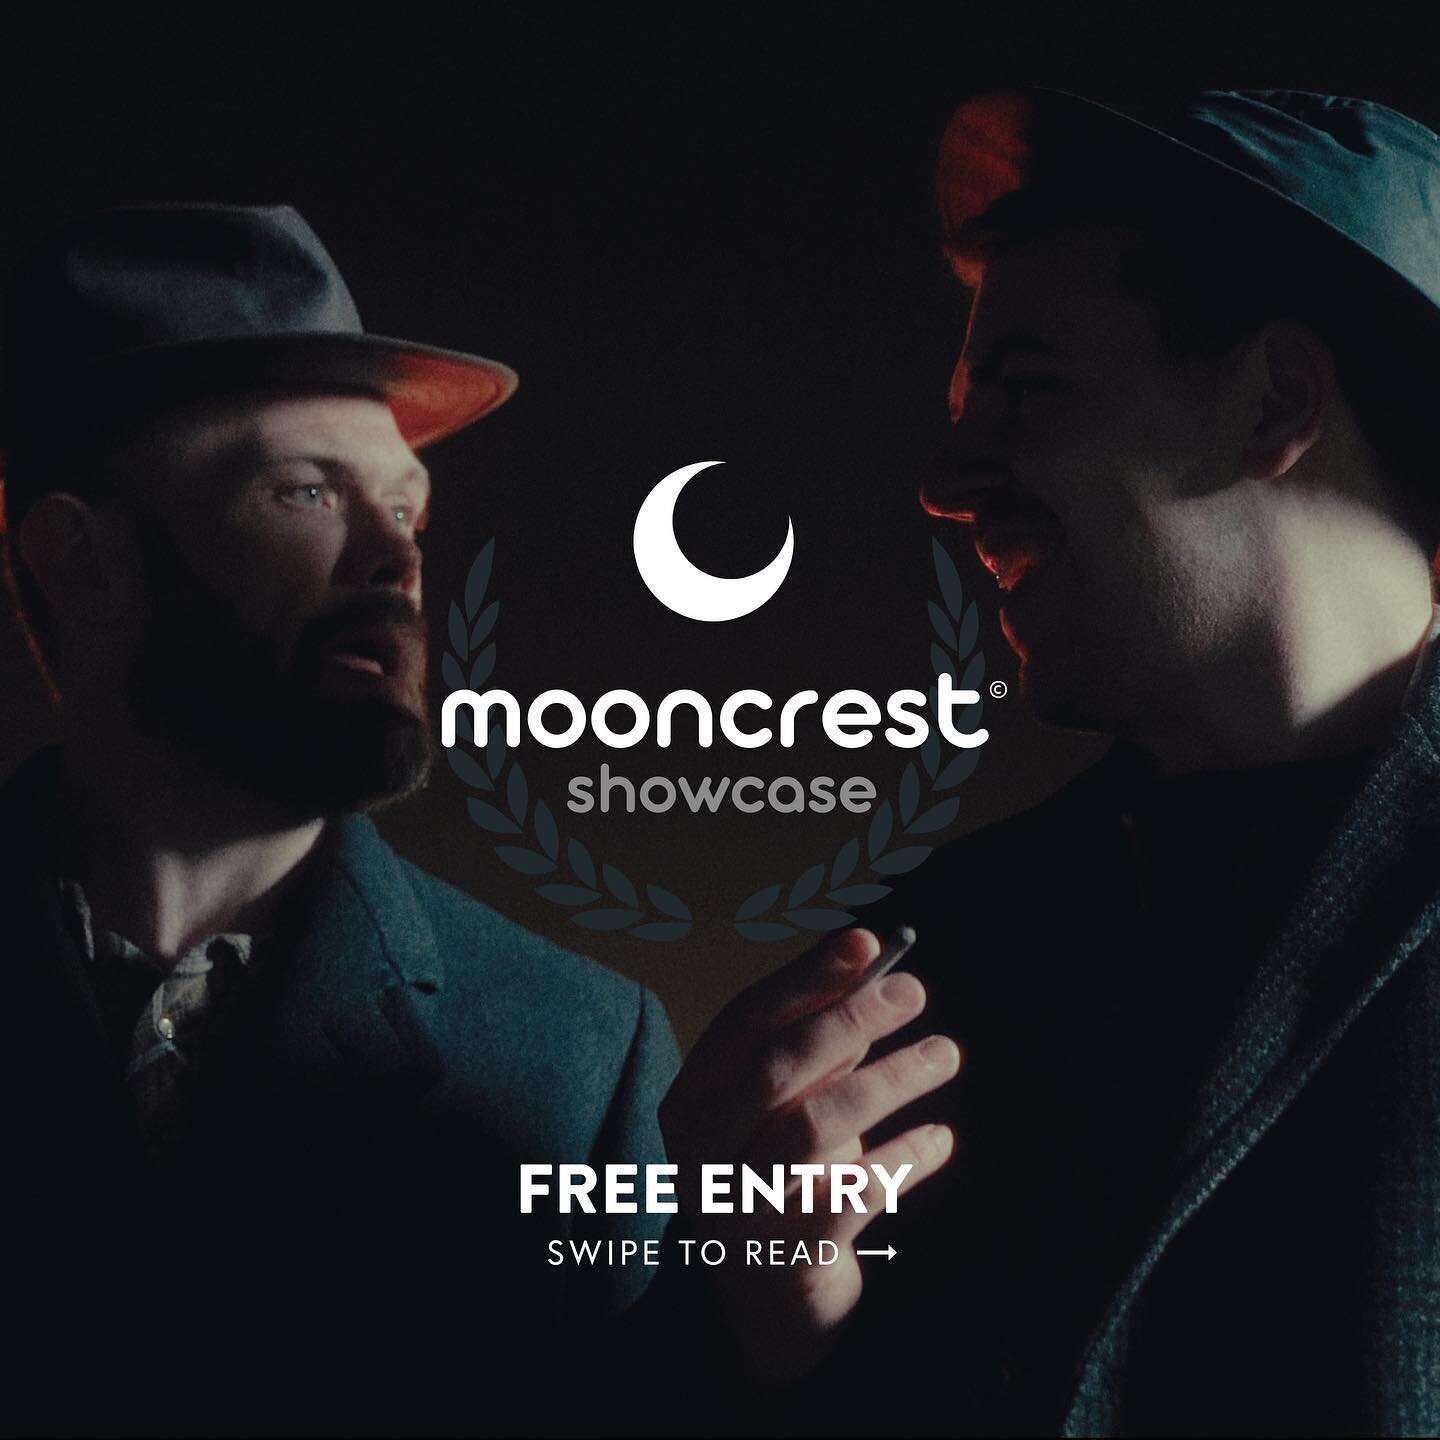 🎟️ Free Tickets in Bio!

Our first company showcase will take place on the 22nd October, 2022 at The Braid Film Theatre at Ballymena&rsquo;s town hall.

Swipe for full details. We hope to see you all there!

#mooncrest #companyshowcase #shortfilms #